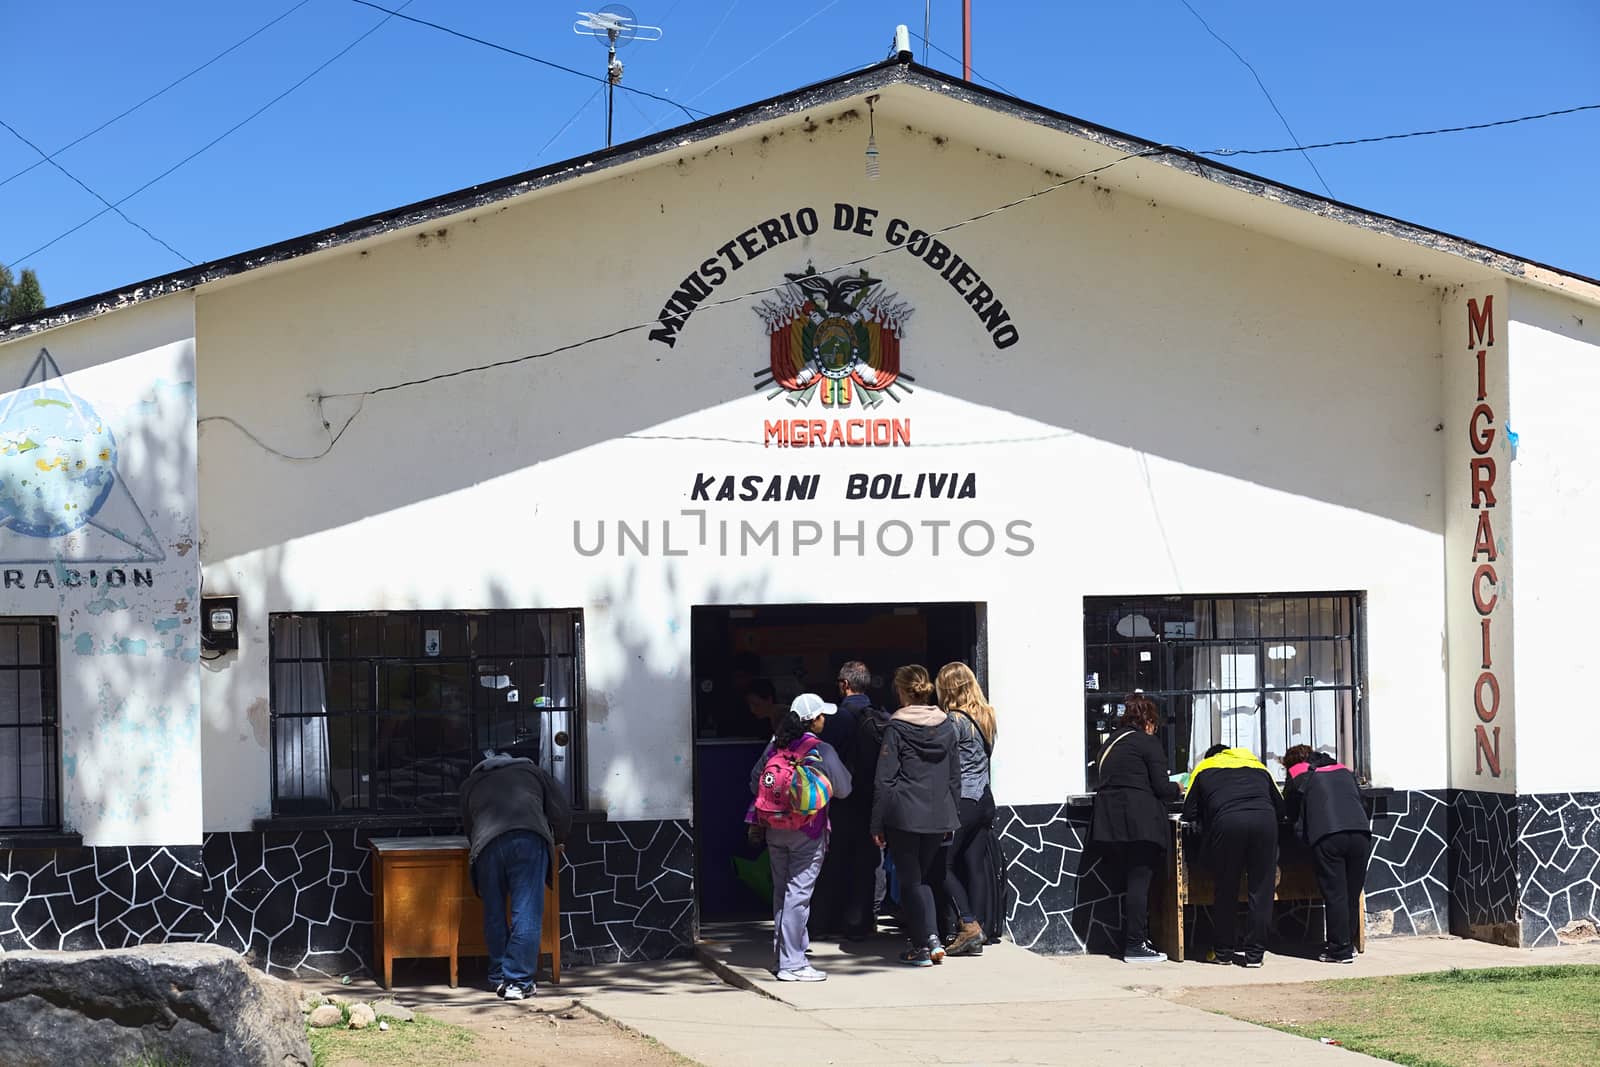 KASANI, BOLIVIA - OCTOBER 10, 2014: Unidentified people standing in line in front of the migration office on the Bolivian side of the Peruvian-Bolivian border on October 10, 2014 in Kasani, Bolivia